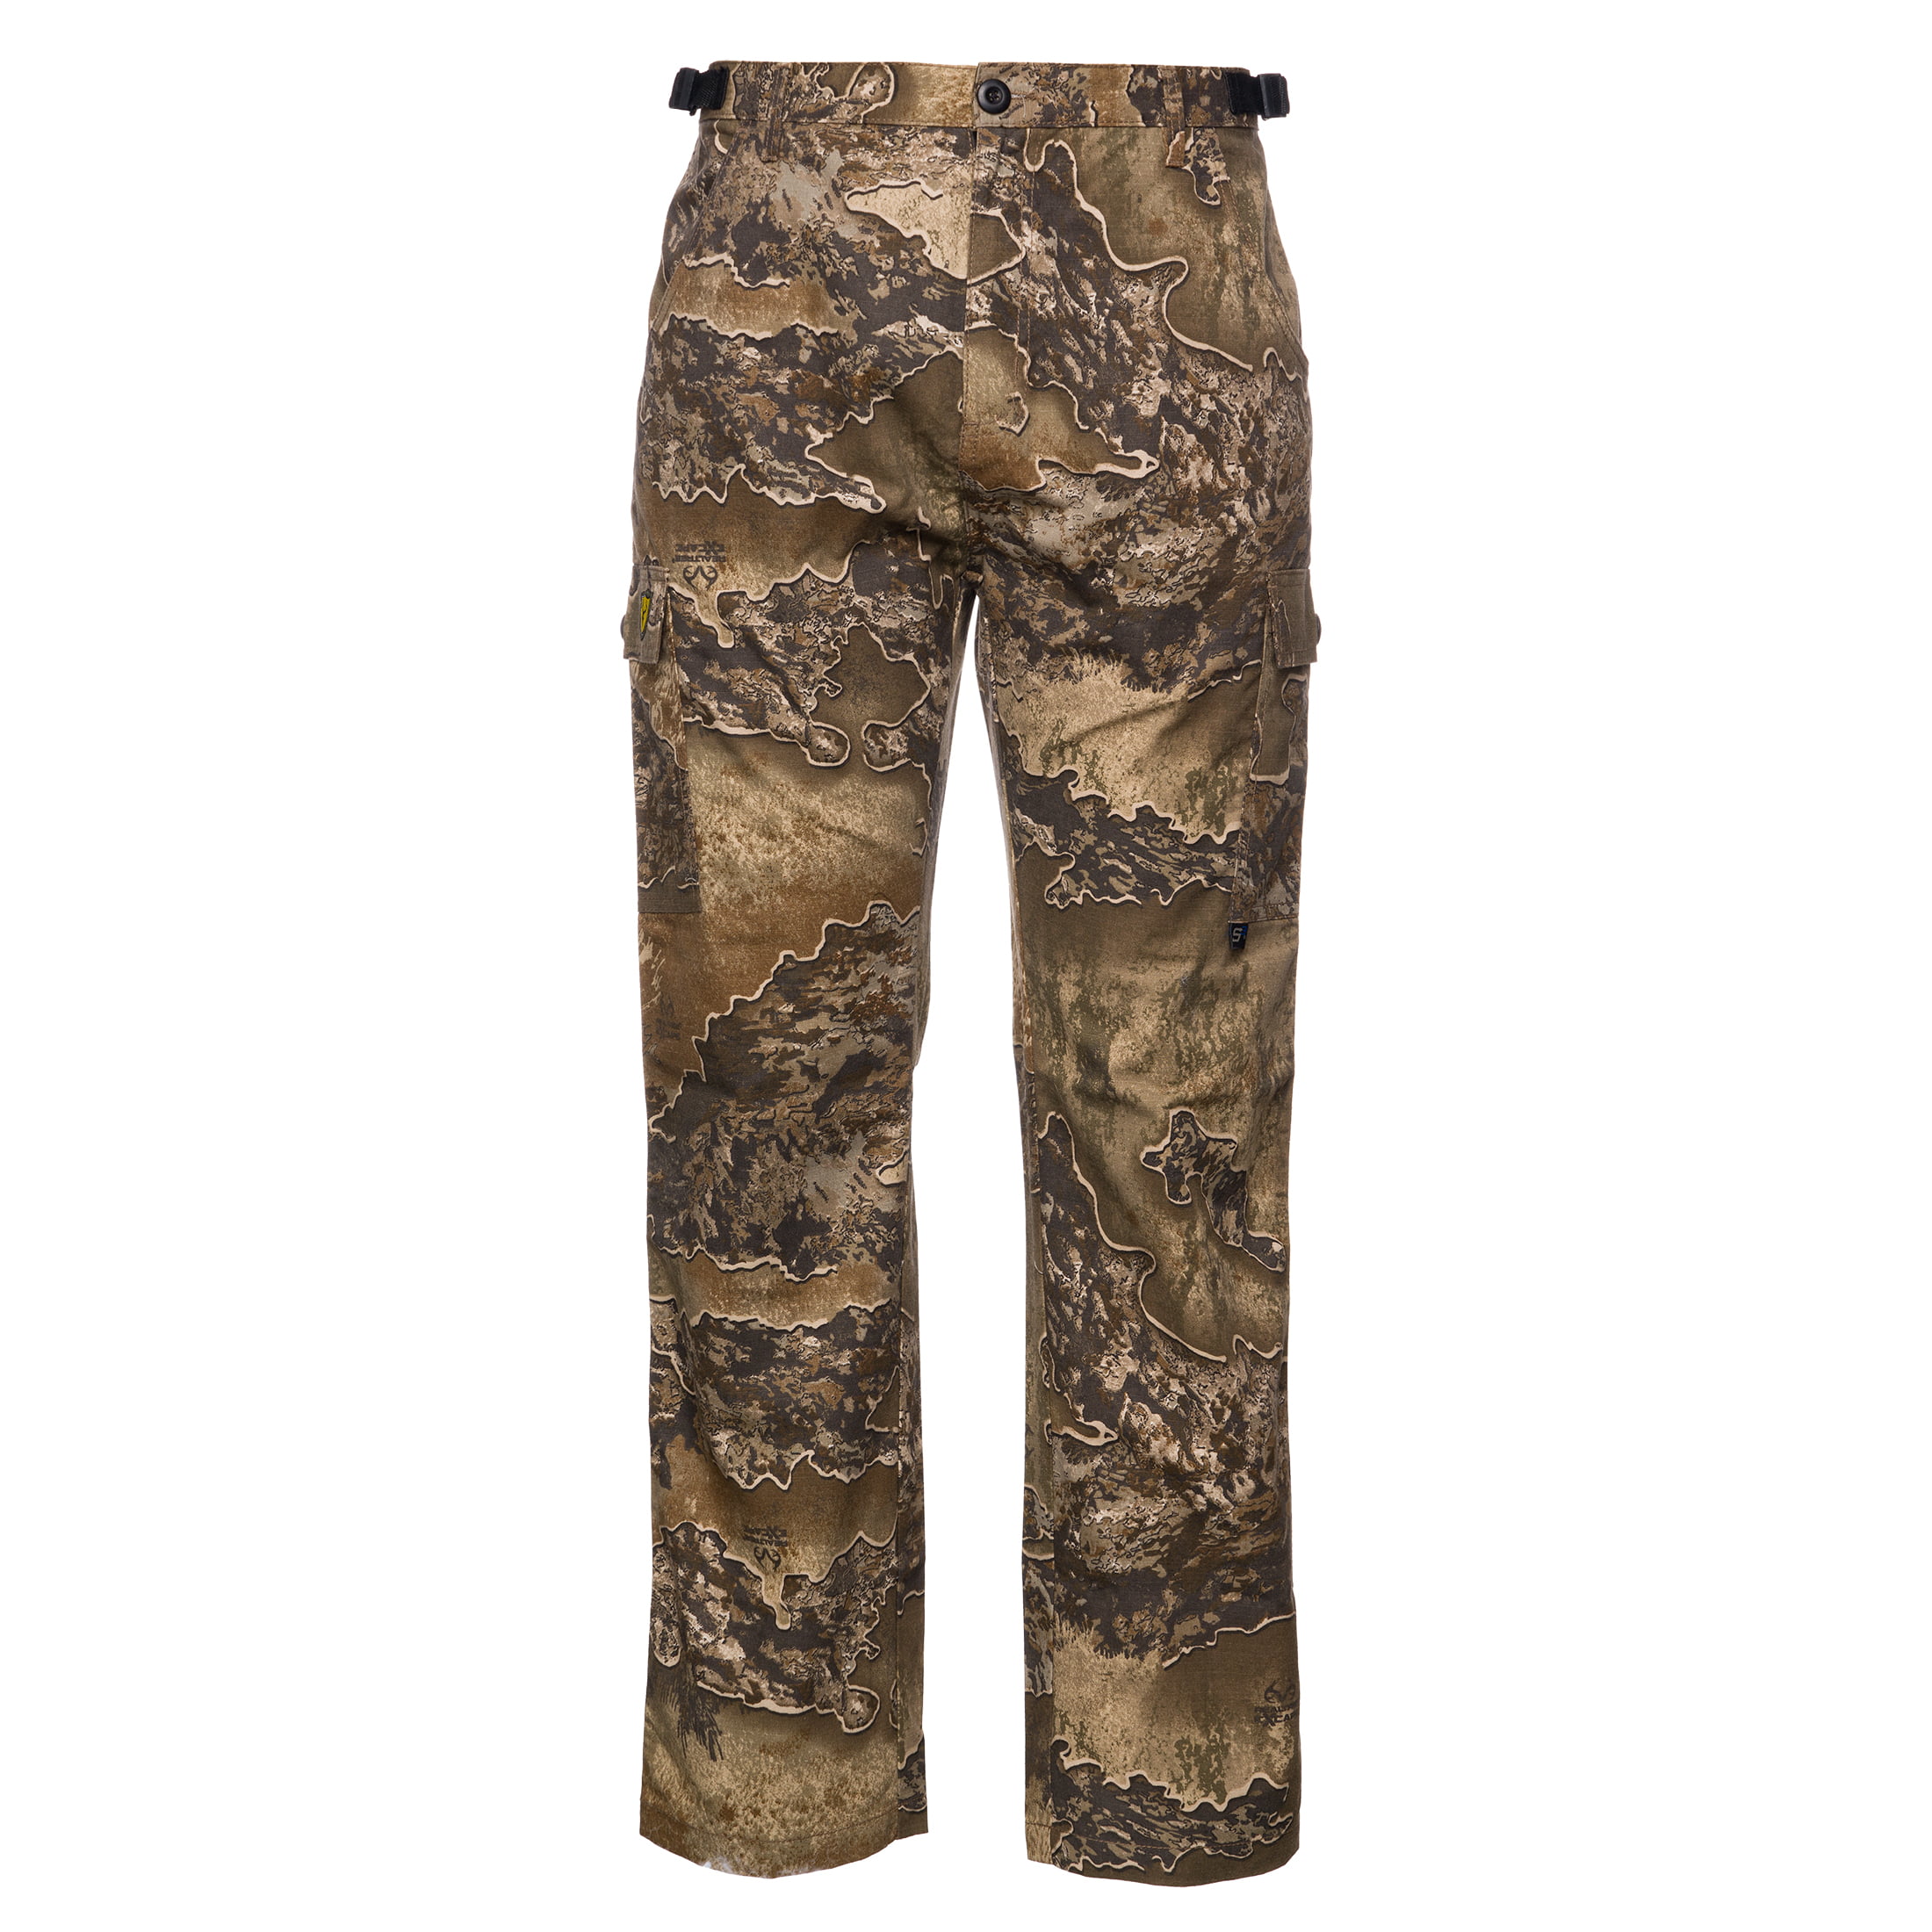 New REALTREE XTRA Men's 5 Pocket Flex Pants Camo Hunting Jeans CHOOSE YOUR SIZE 